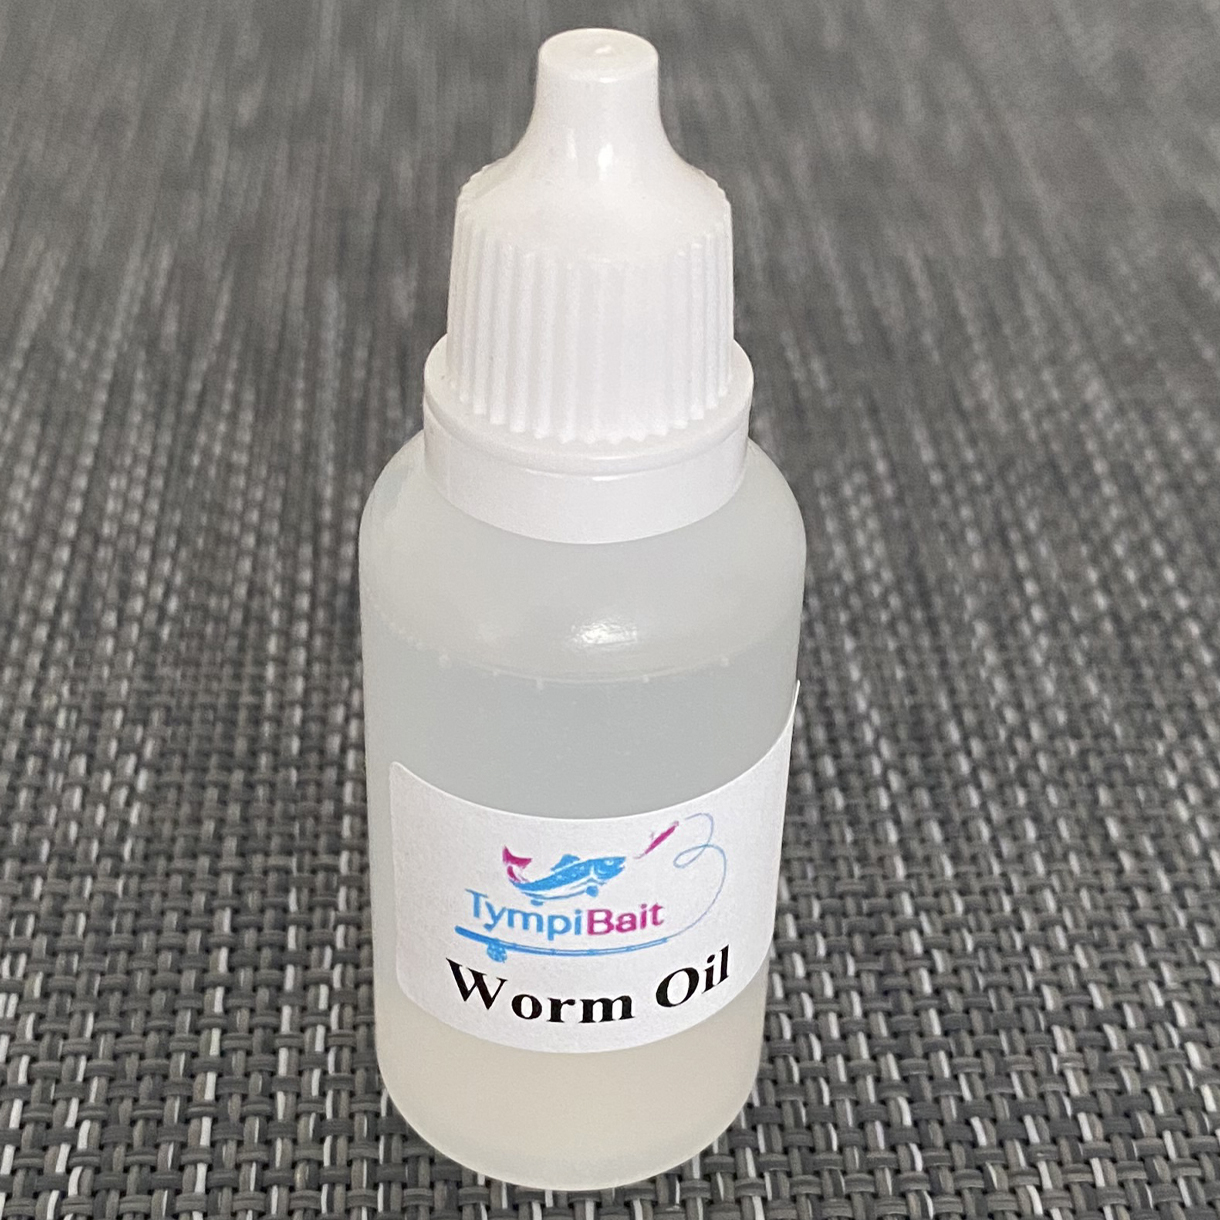 Worm Oil - Duft Olie - Tympibait